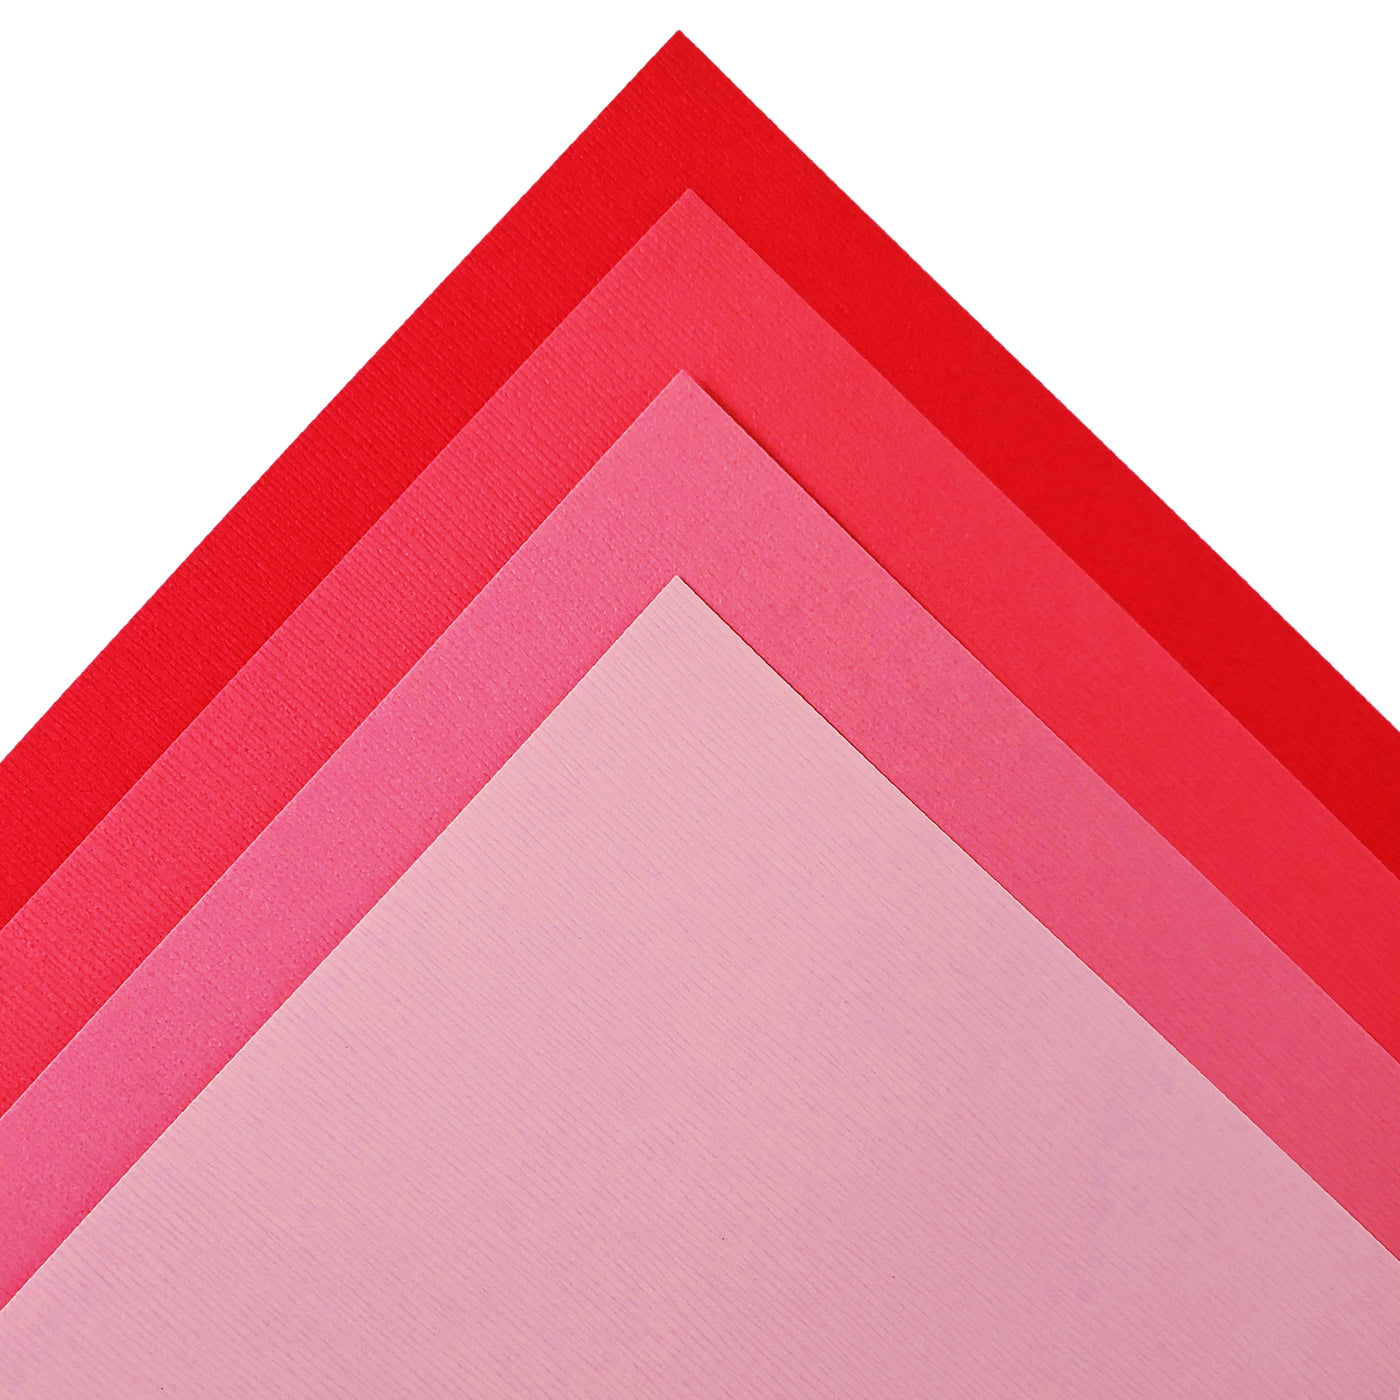 The Pink monochromatic assortment includes three (3) each of four (4) shades of pink colors of Bazzill textured cardstock.